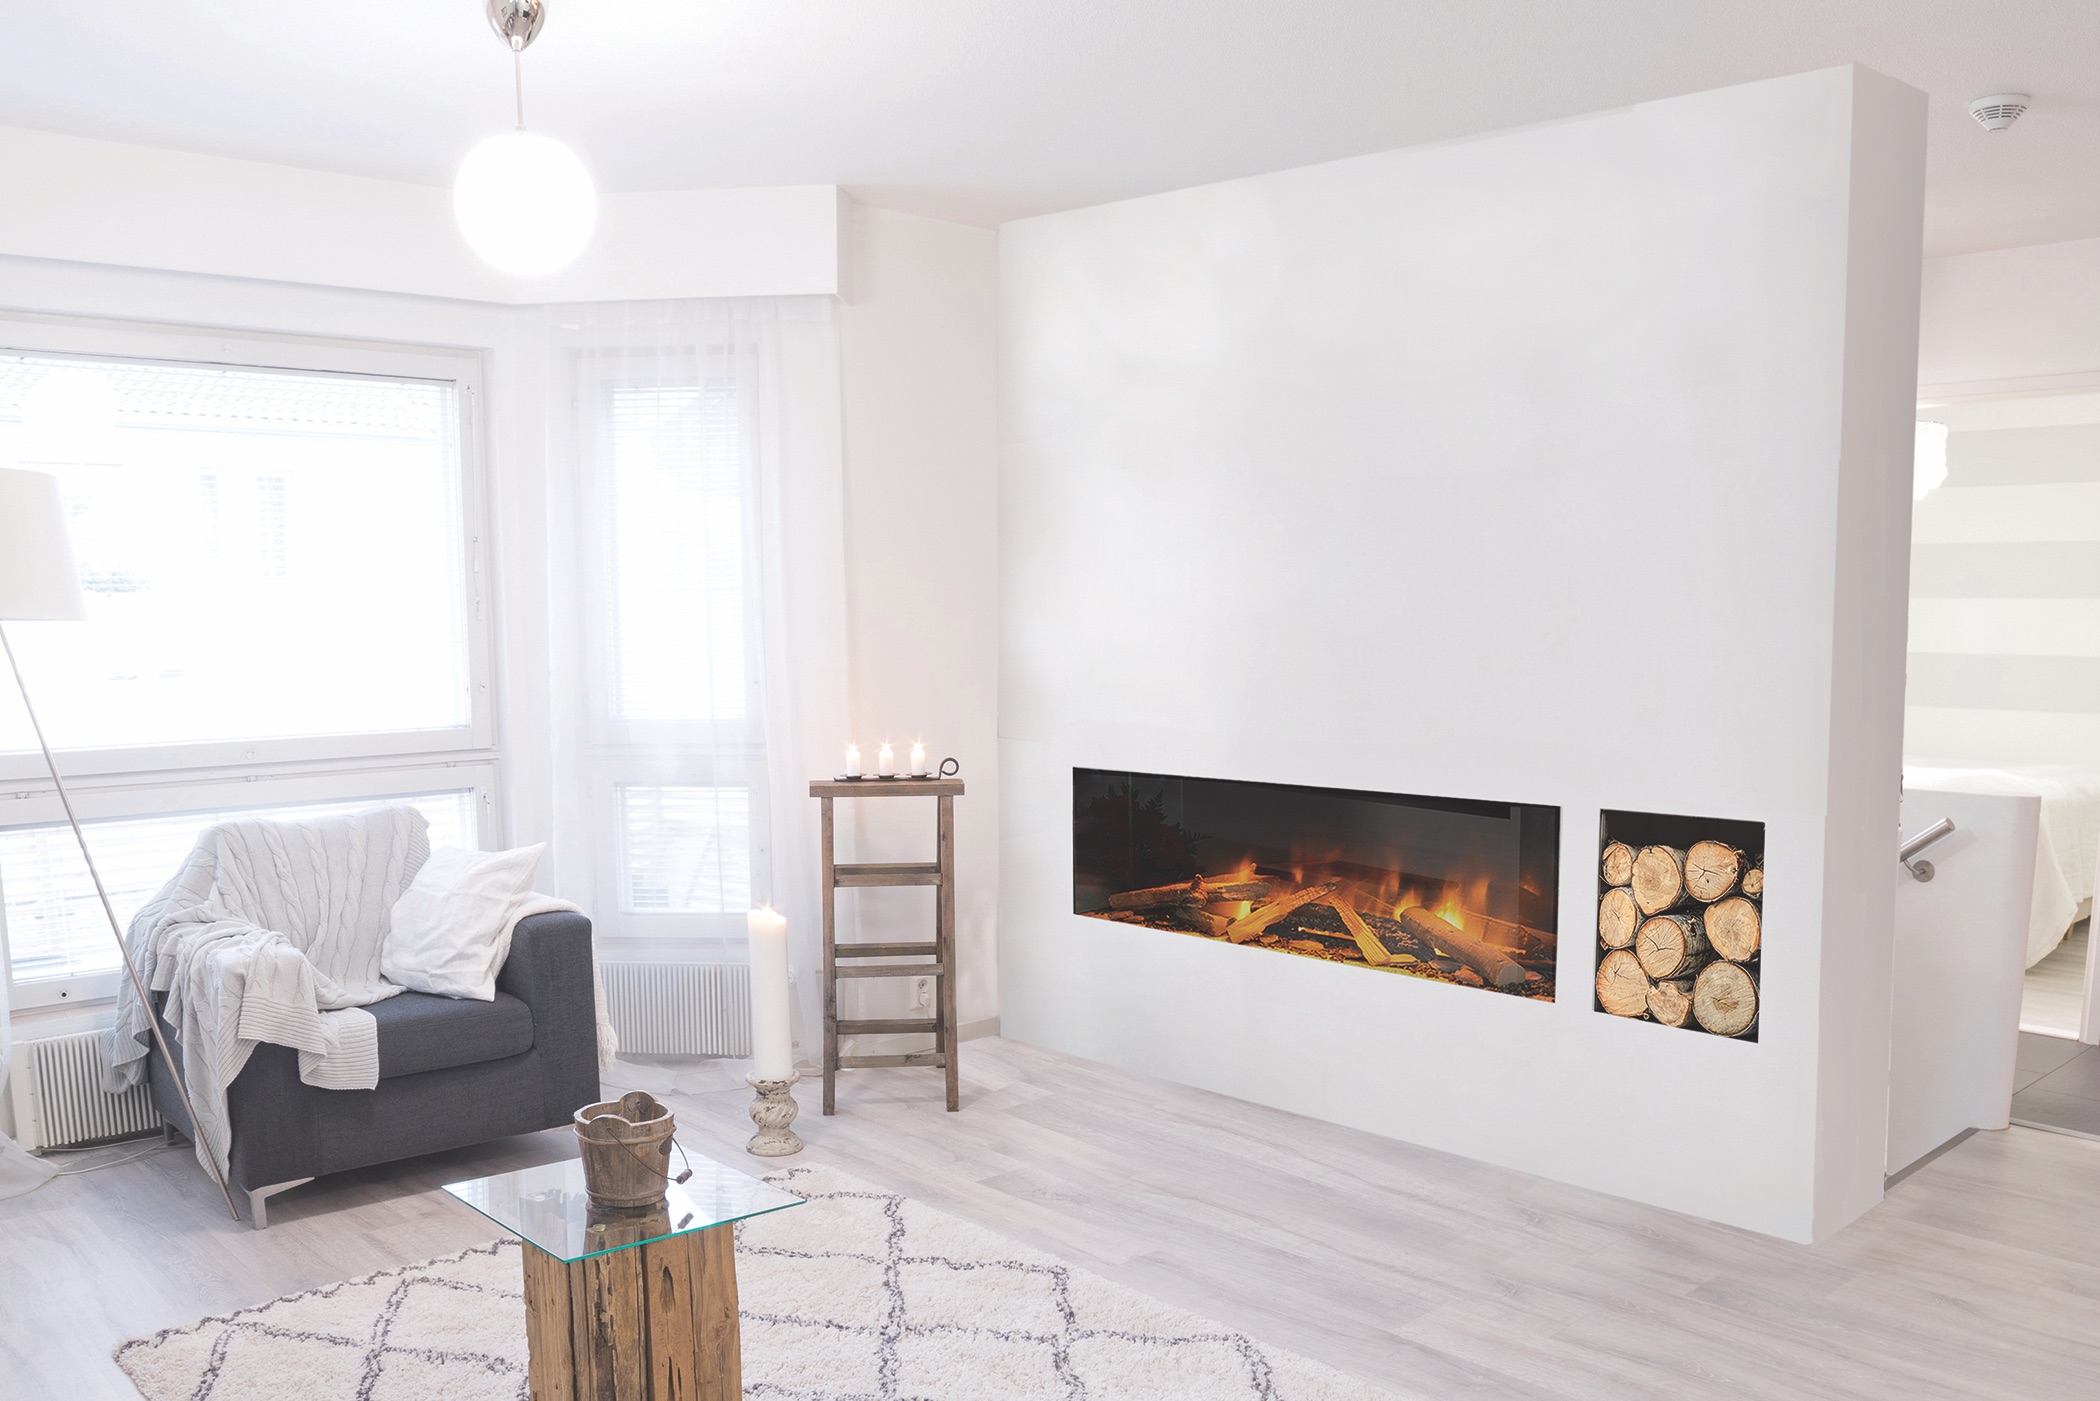 E Series electric fireplaces from Electric Modern offer a solution for ventless applications in multifamily structures or environmentally friendly spaces.